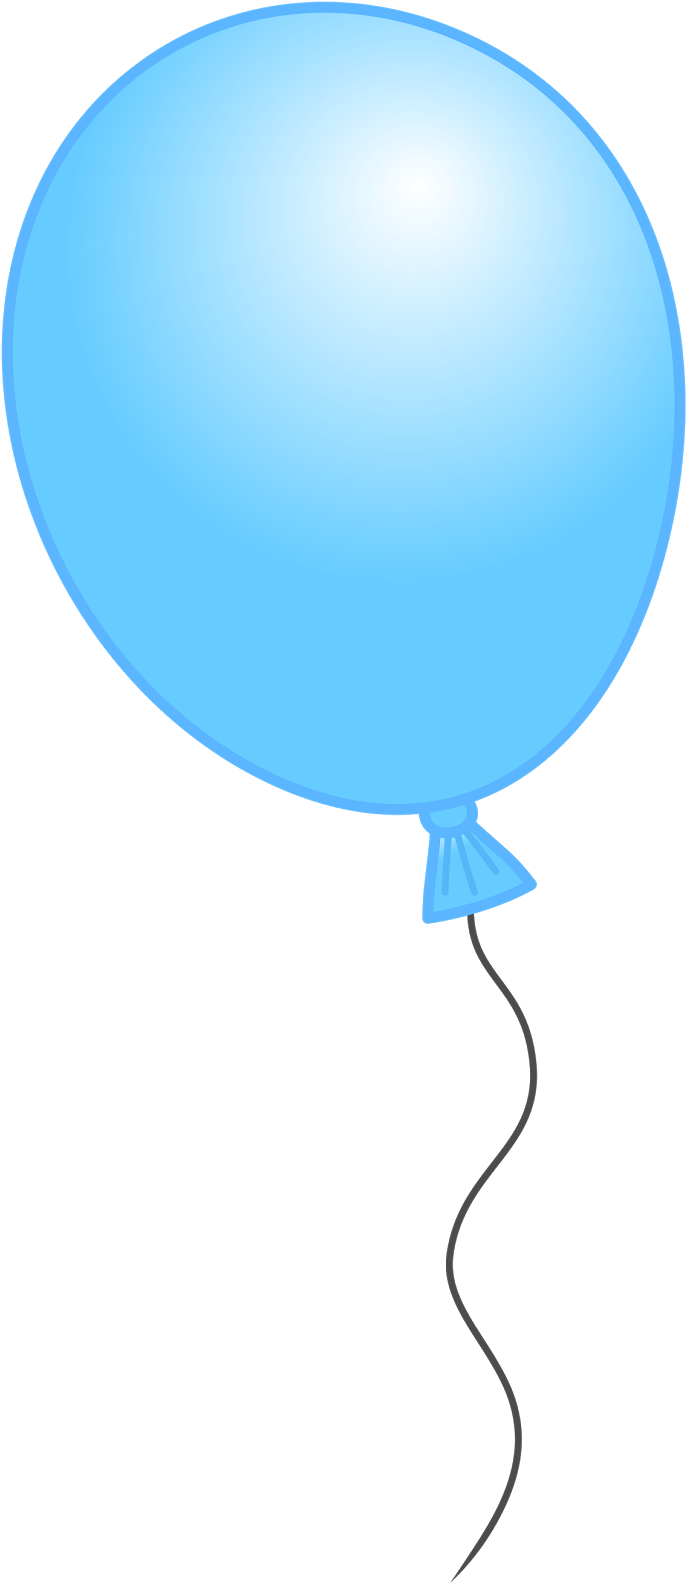 balloon, painting, sun clip art high quality png images